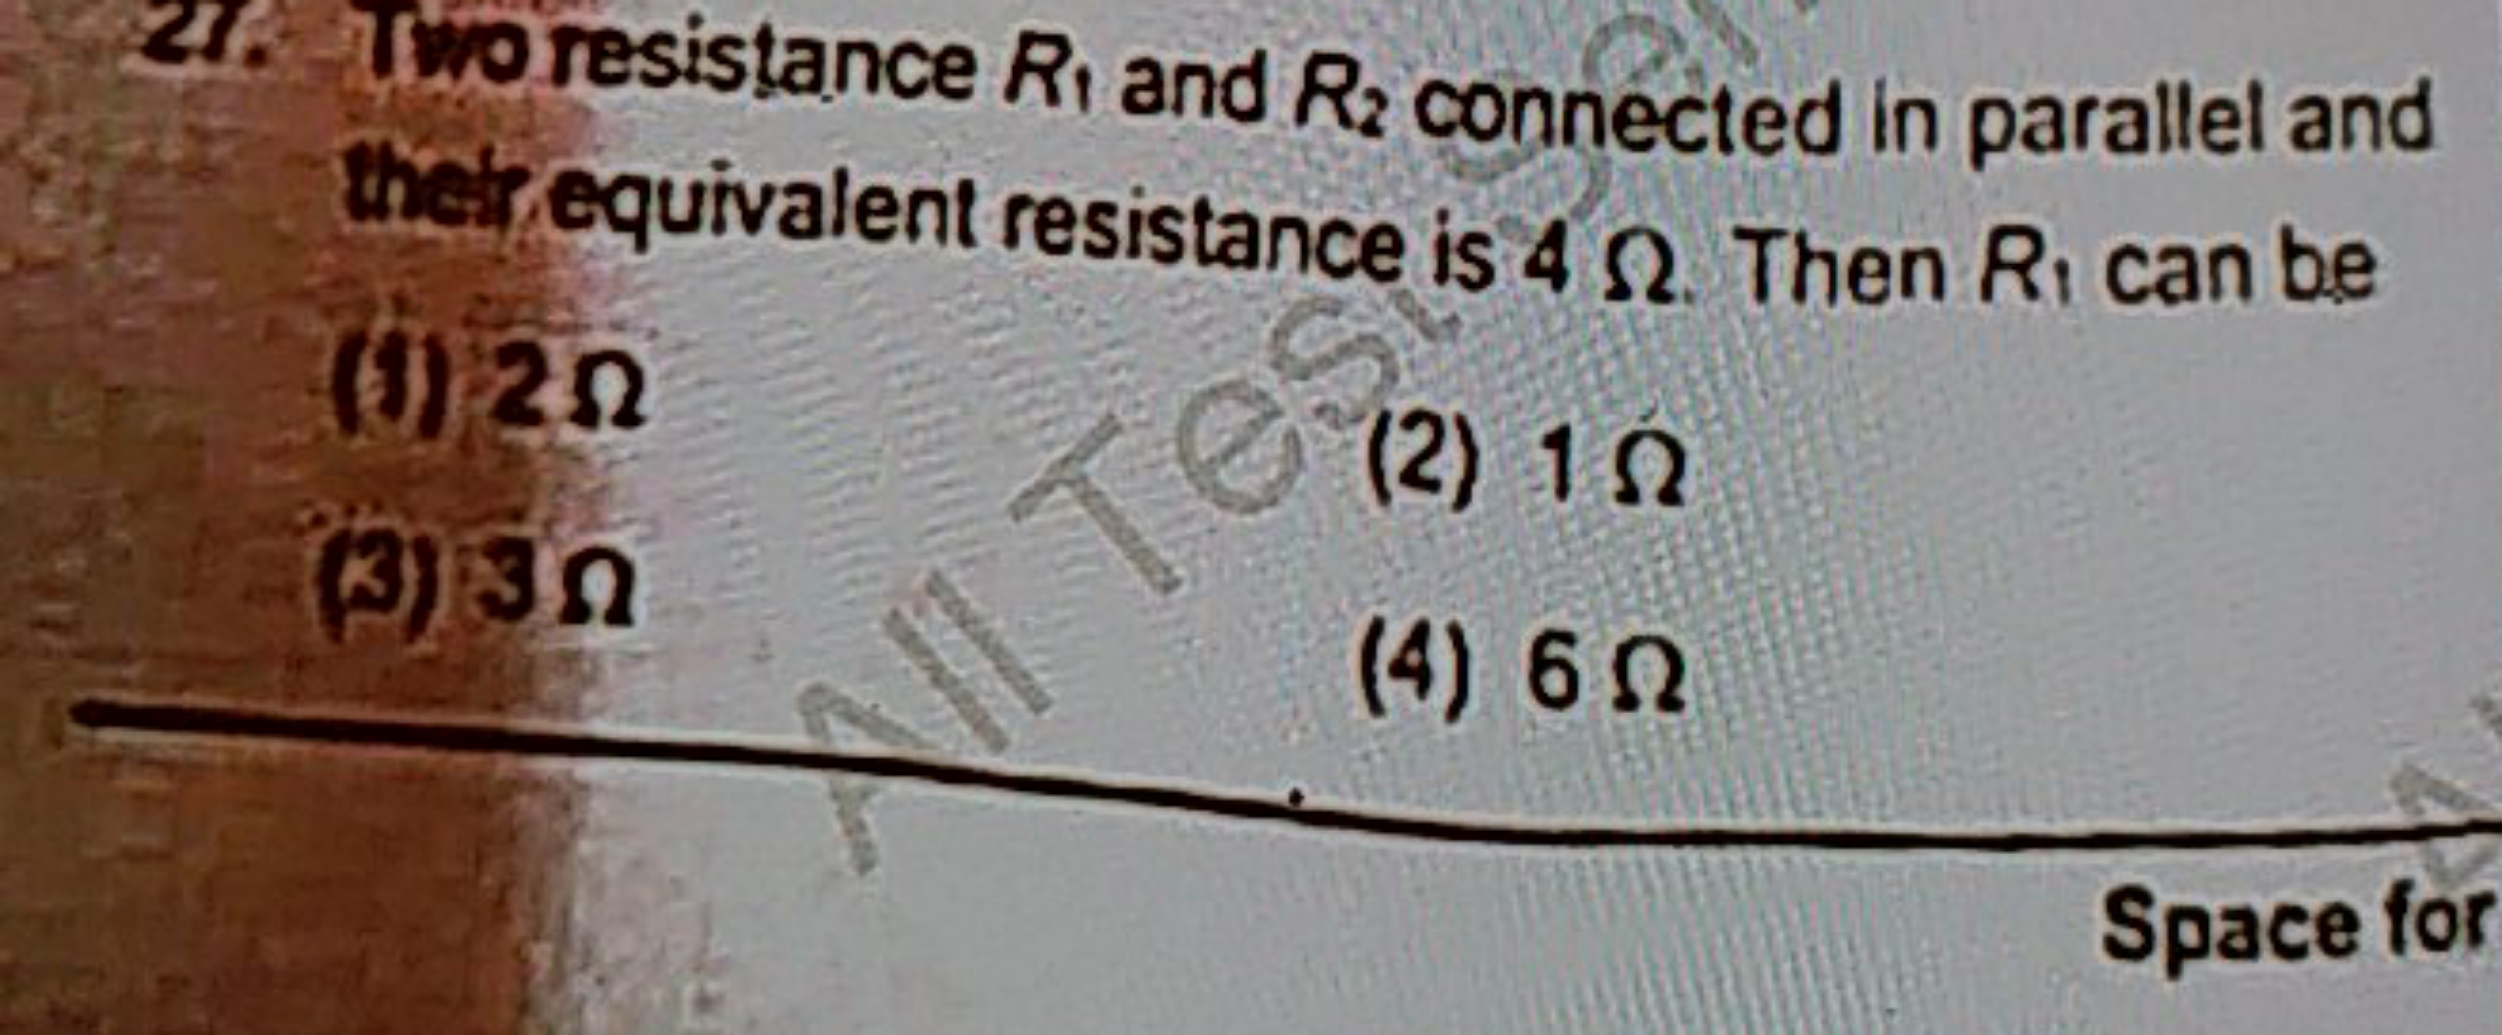 21. Tworesistance R1​ and R2​ connected in parallel and thetrequivalen